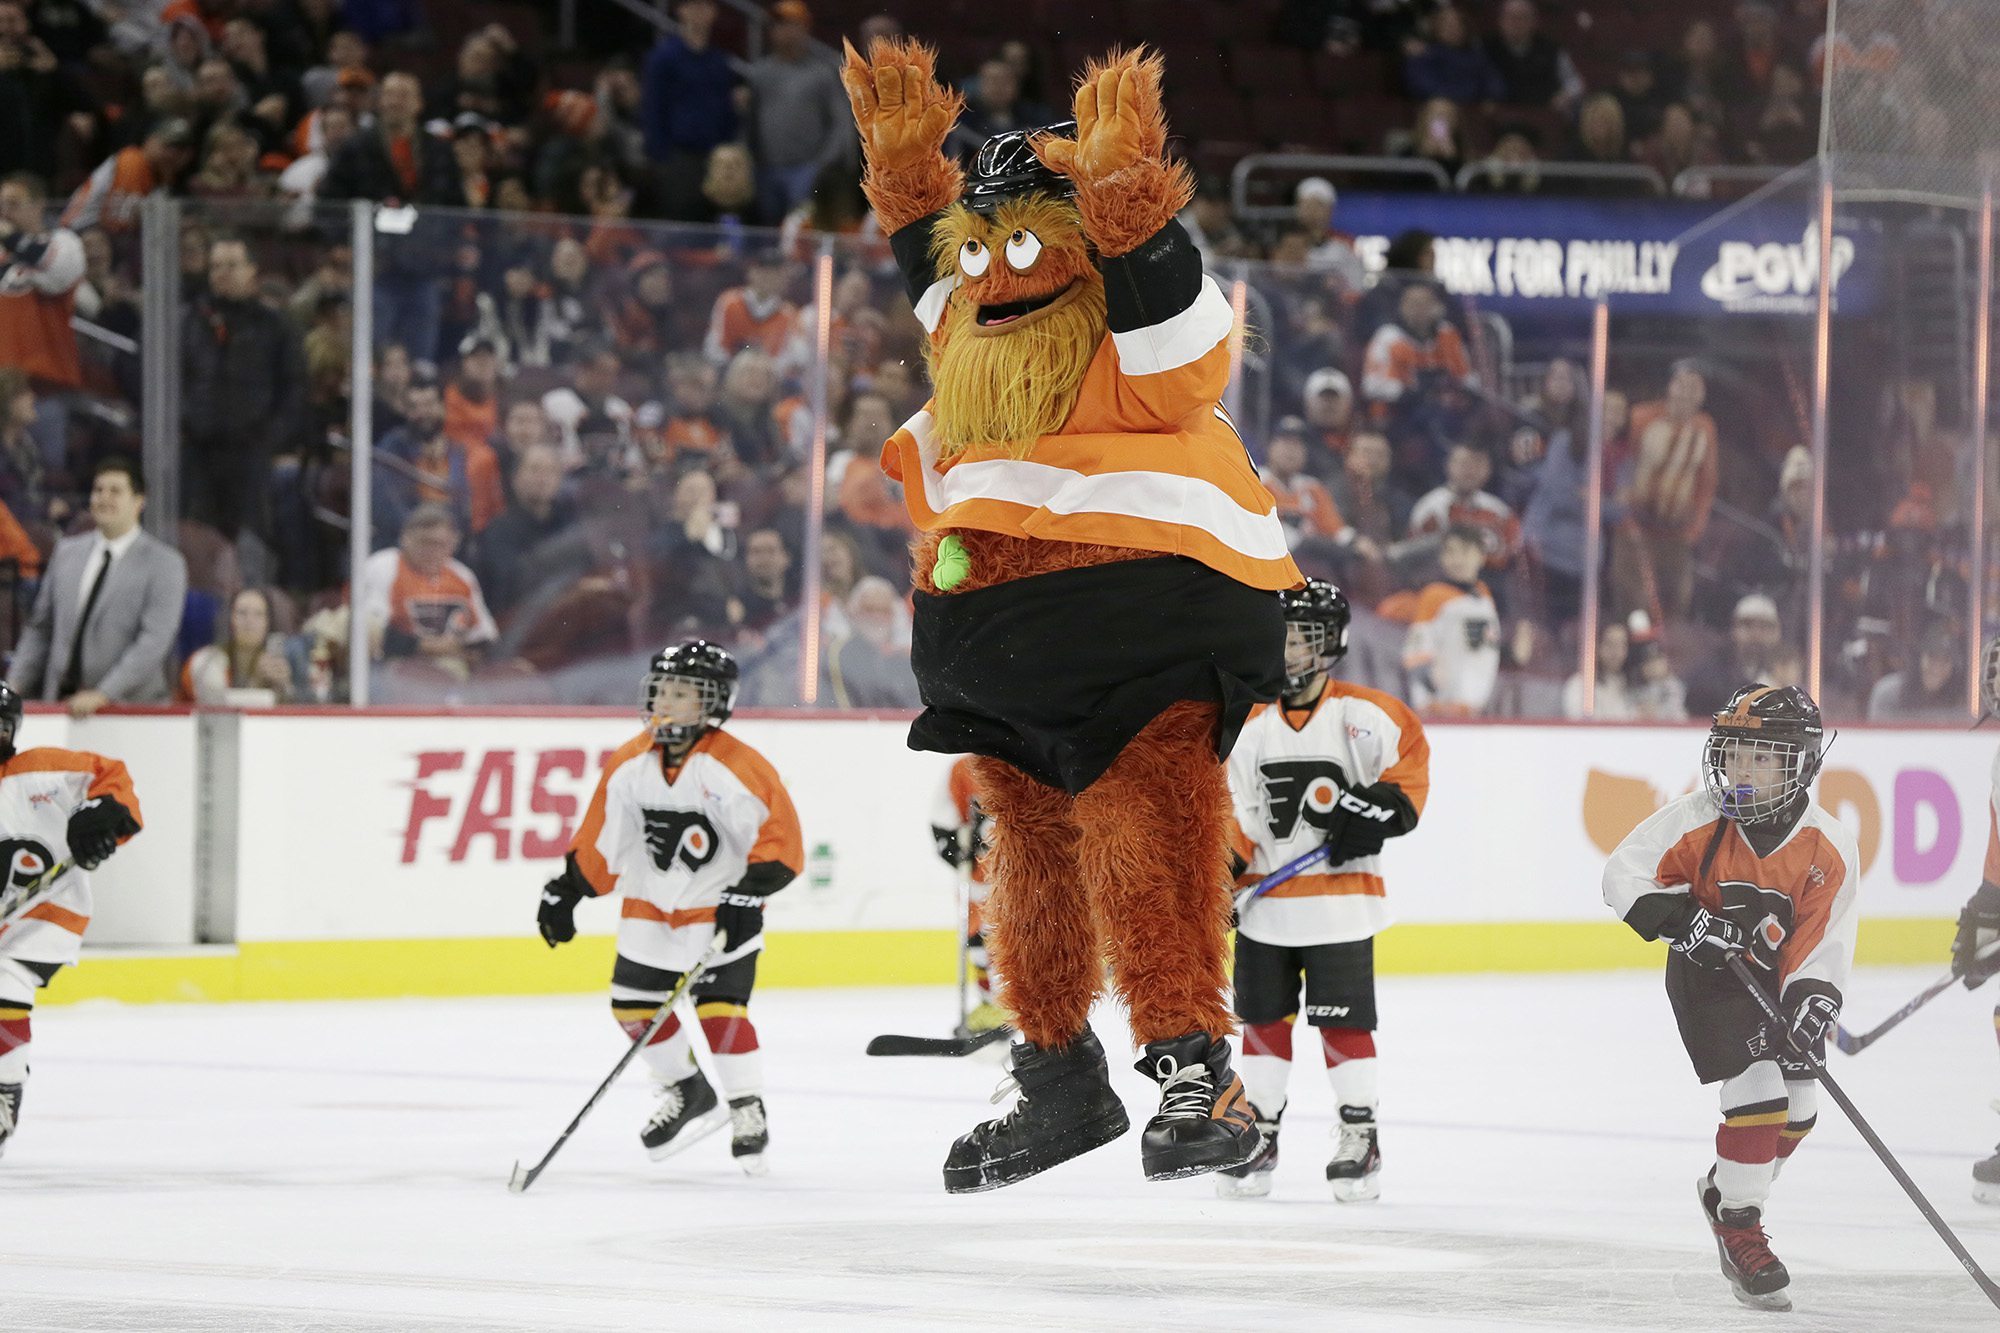 Philadelphia Flyers mascot Gritty accused of punching boy during photo  shoot - ABC News